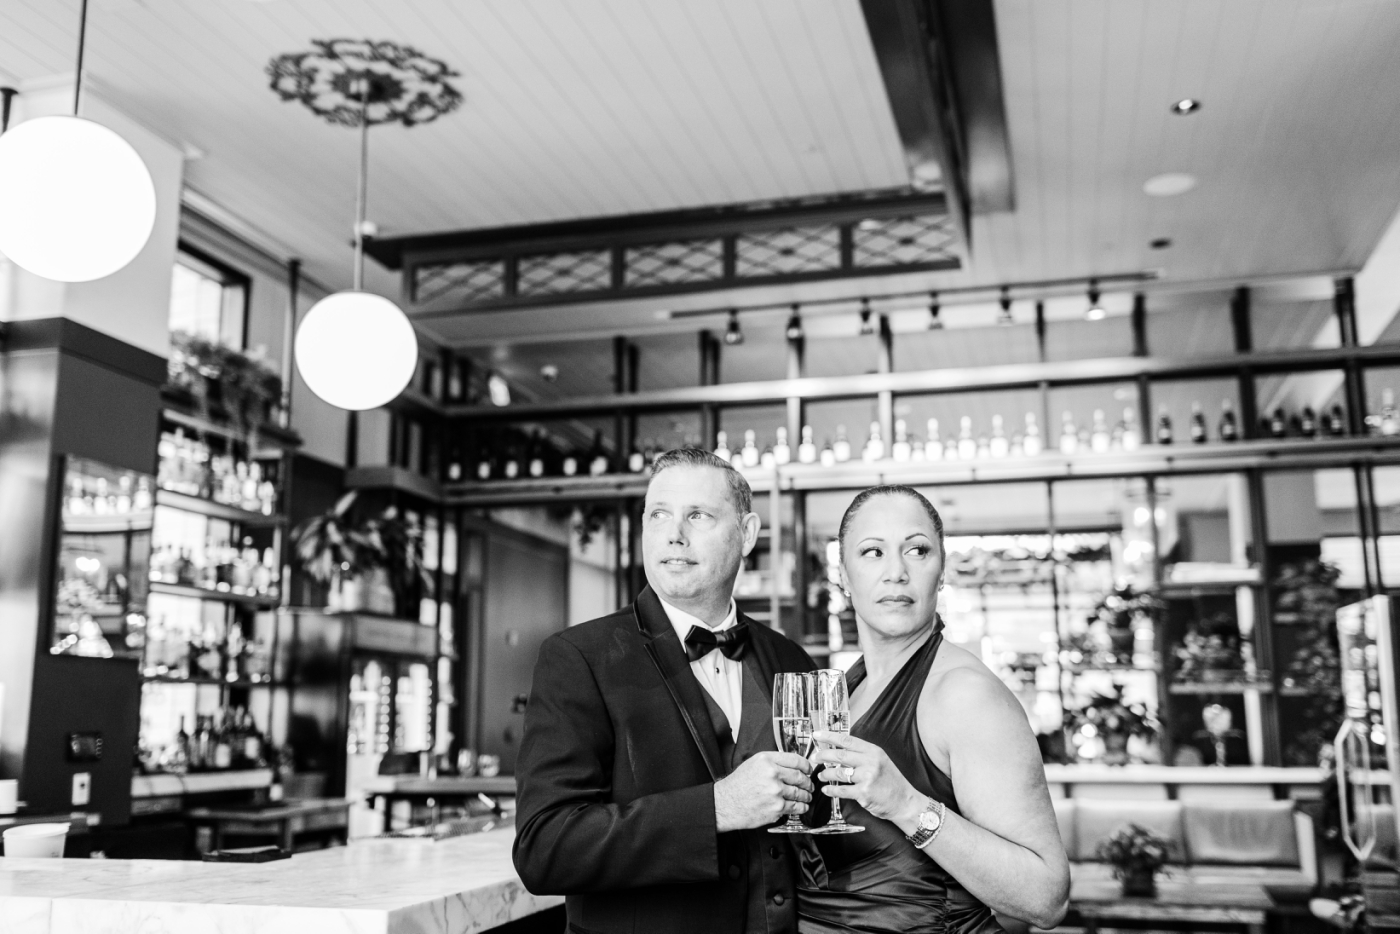 Formal Engagement Session at Perry Lane Hotel